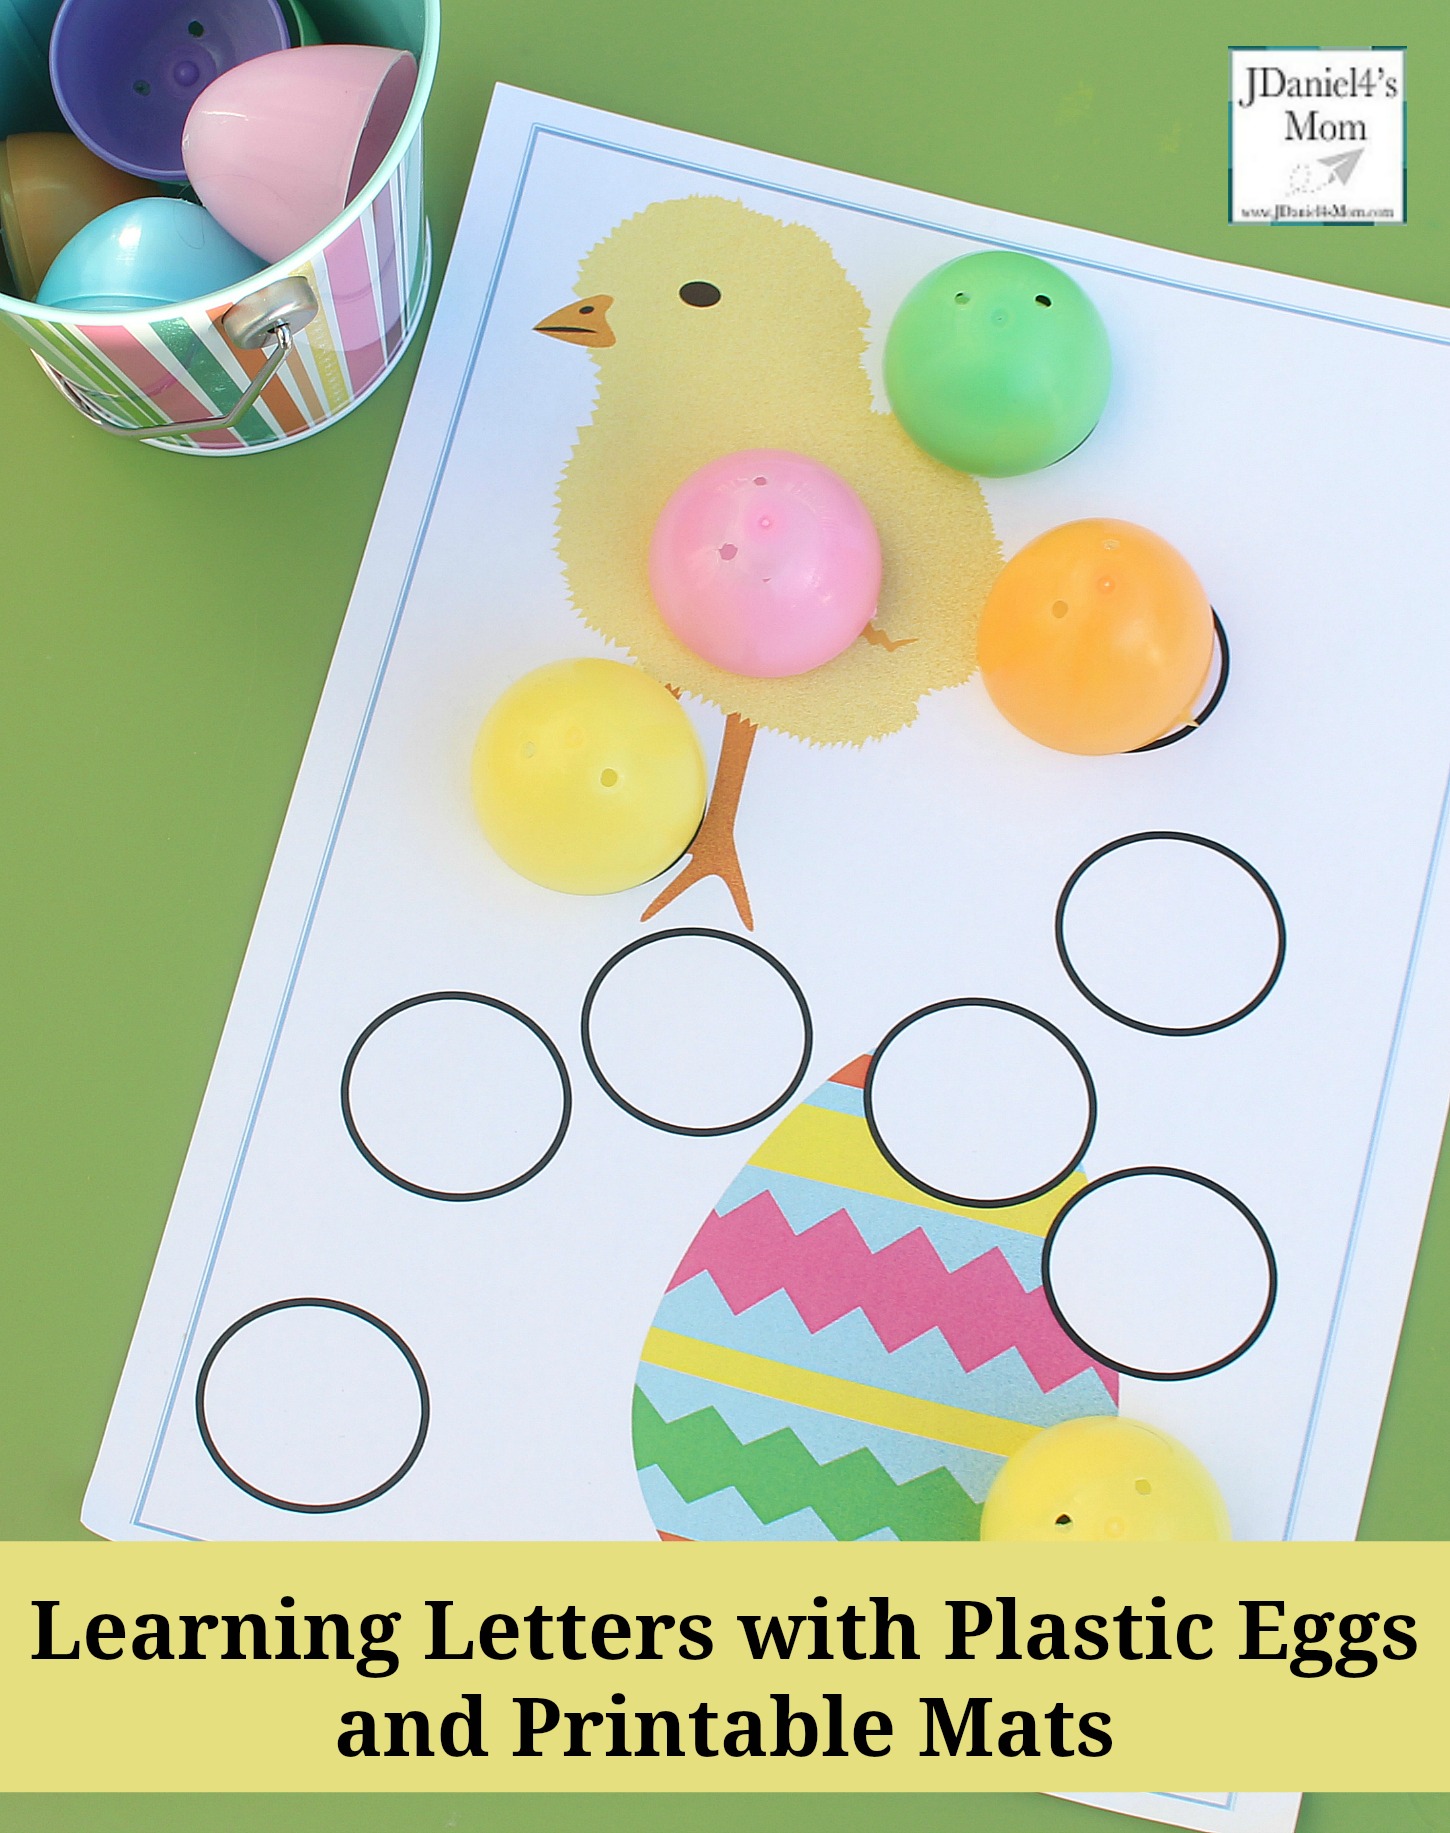 Learning Letters with Plastic Eggs and Printable Mats- Your children at home and students at school will have fun building the letters of the alphabet with the tops and bottoms of plastic Ester eggs.